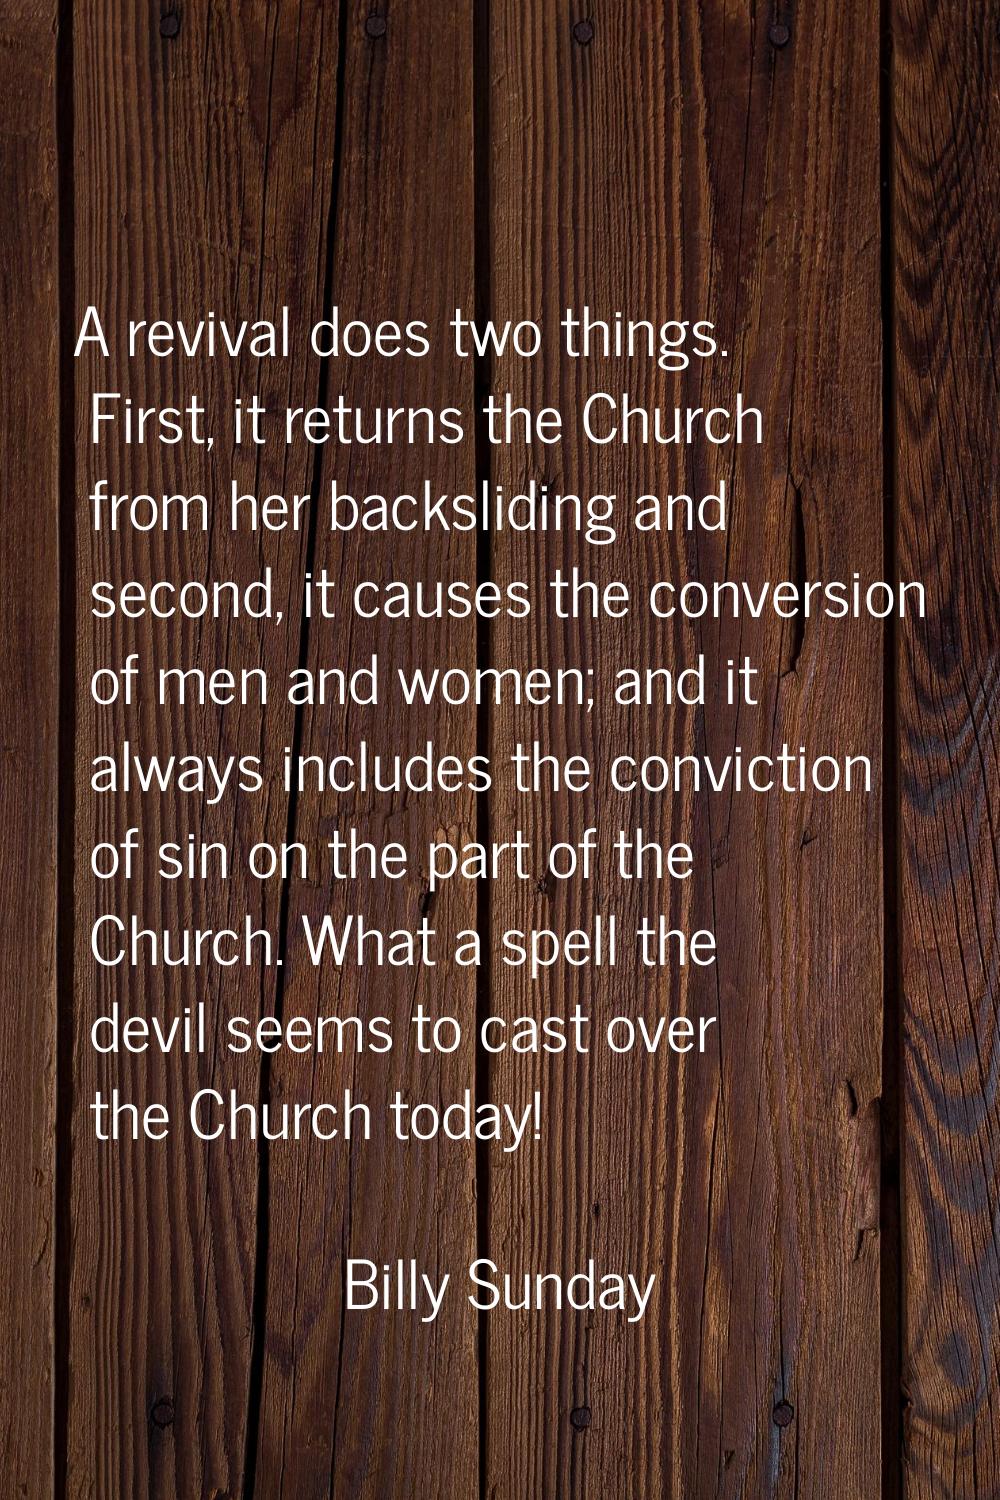 A revival does two things. First, it returns the Church from her backsliding and second, it causes 